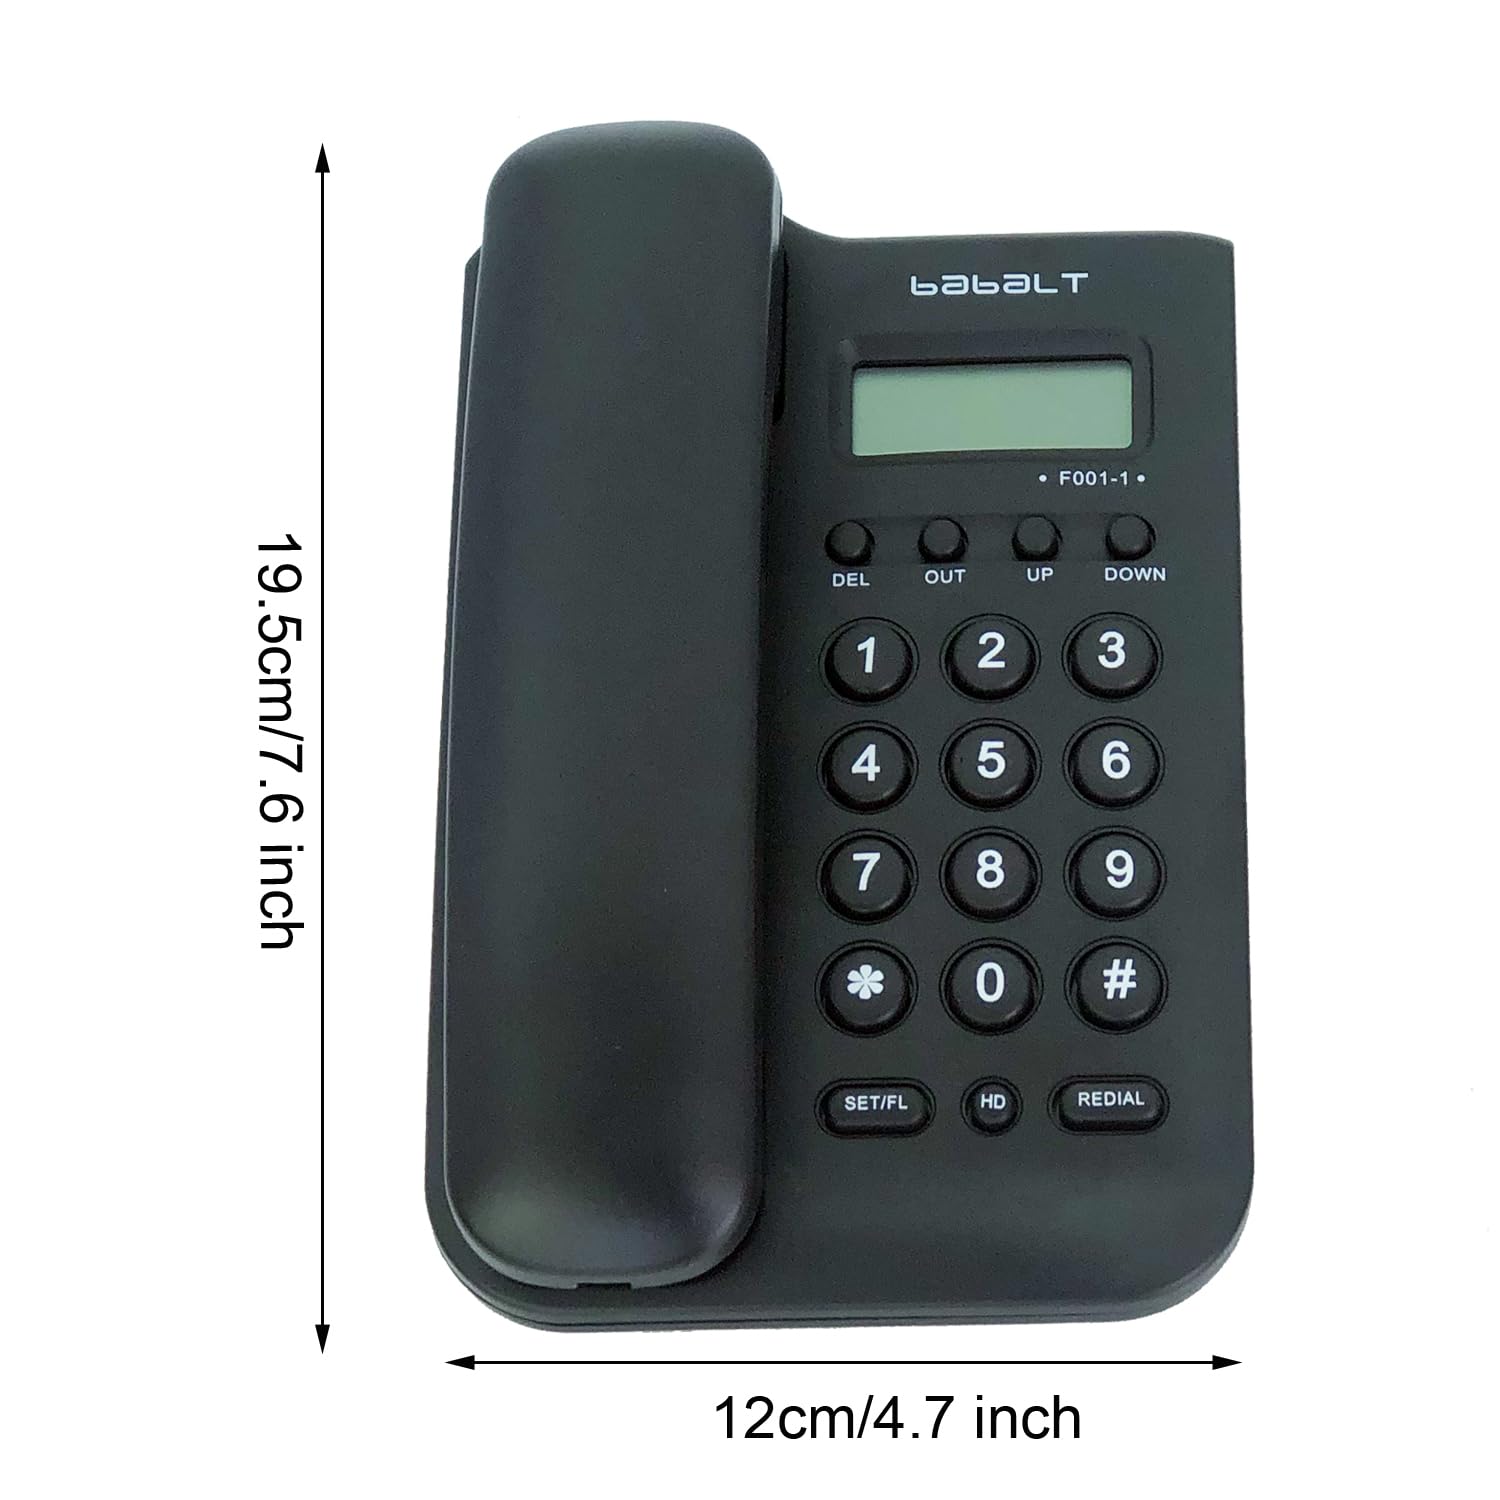 Corded Basic Landline Phone, TelPal FSK/DTMF Simple Caller ID Telephone with LCD Incoming Call Number Display, Small Desk/Wall Mountable Analog Phone for Home Office (Black)